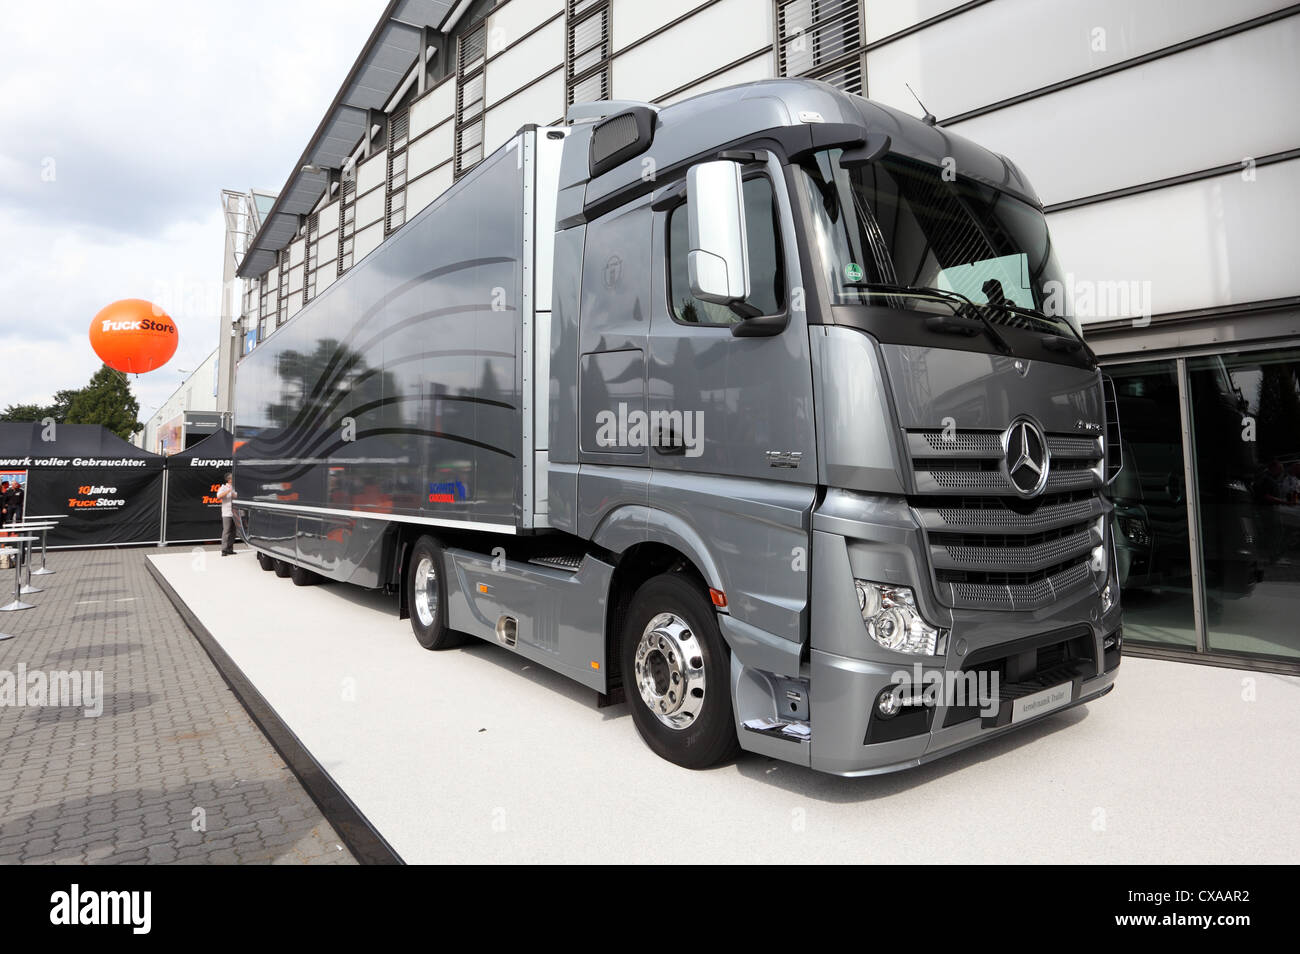 New Mercedes Benz Aerodynamics Truck at the International Motor Show for Commercial Vehicles Stock Photo